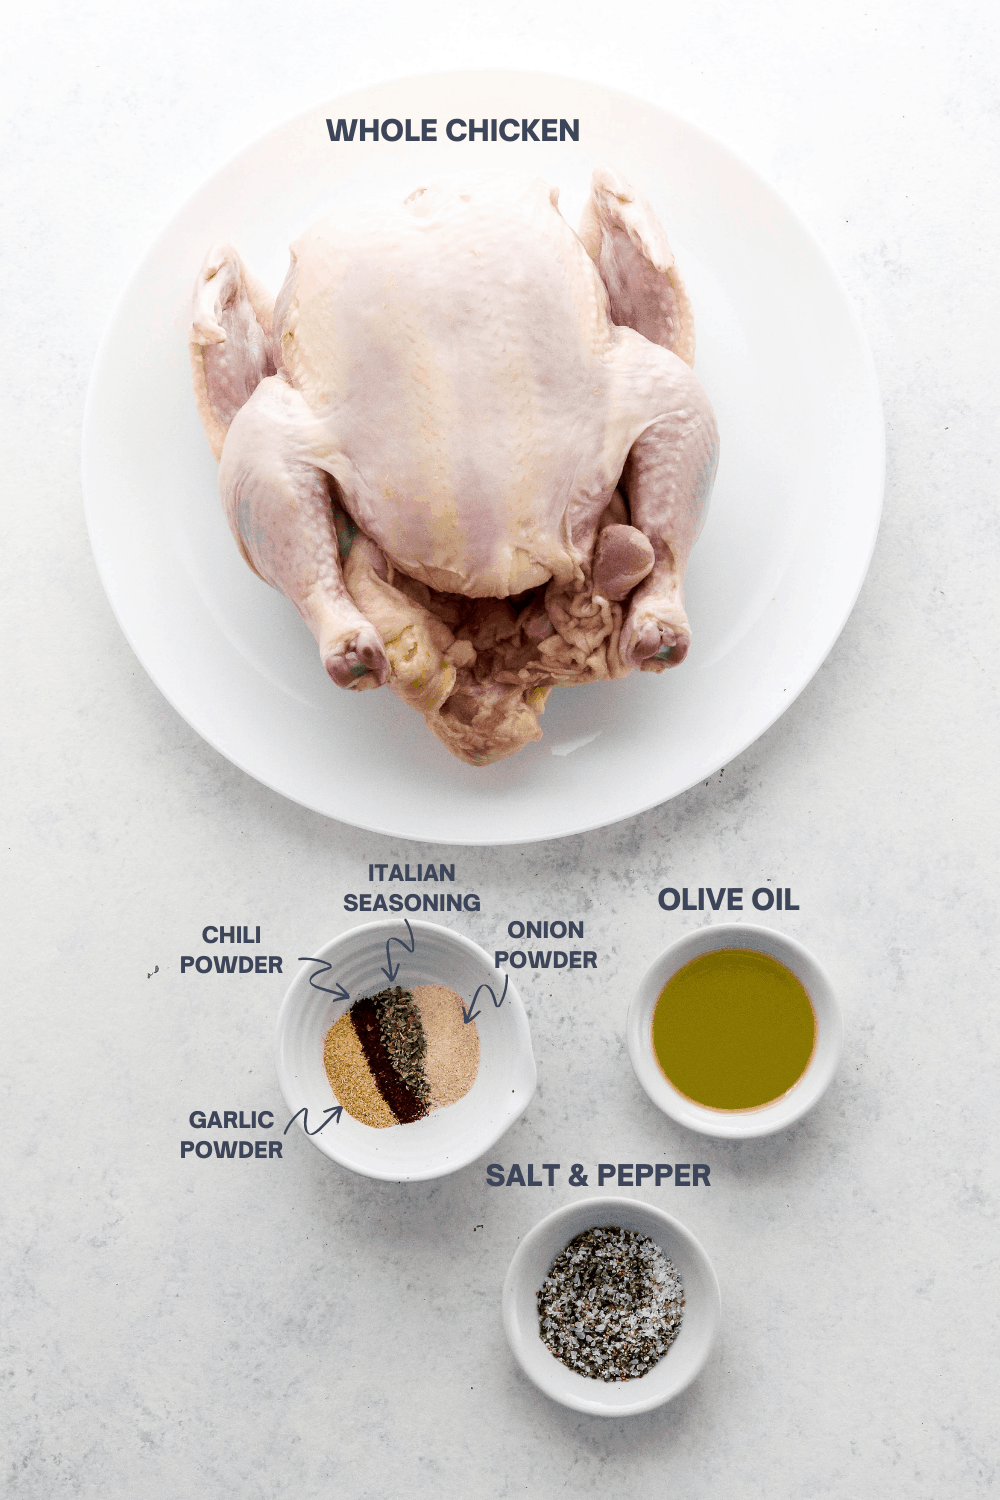 A whole, raw chicken on a round white plate with a bowl of spices and a small bowl of oil and bowl of salt and pepper in front of it with labels for these ingredients over the top of each item. 